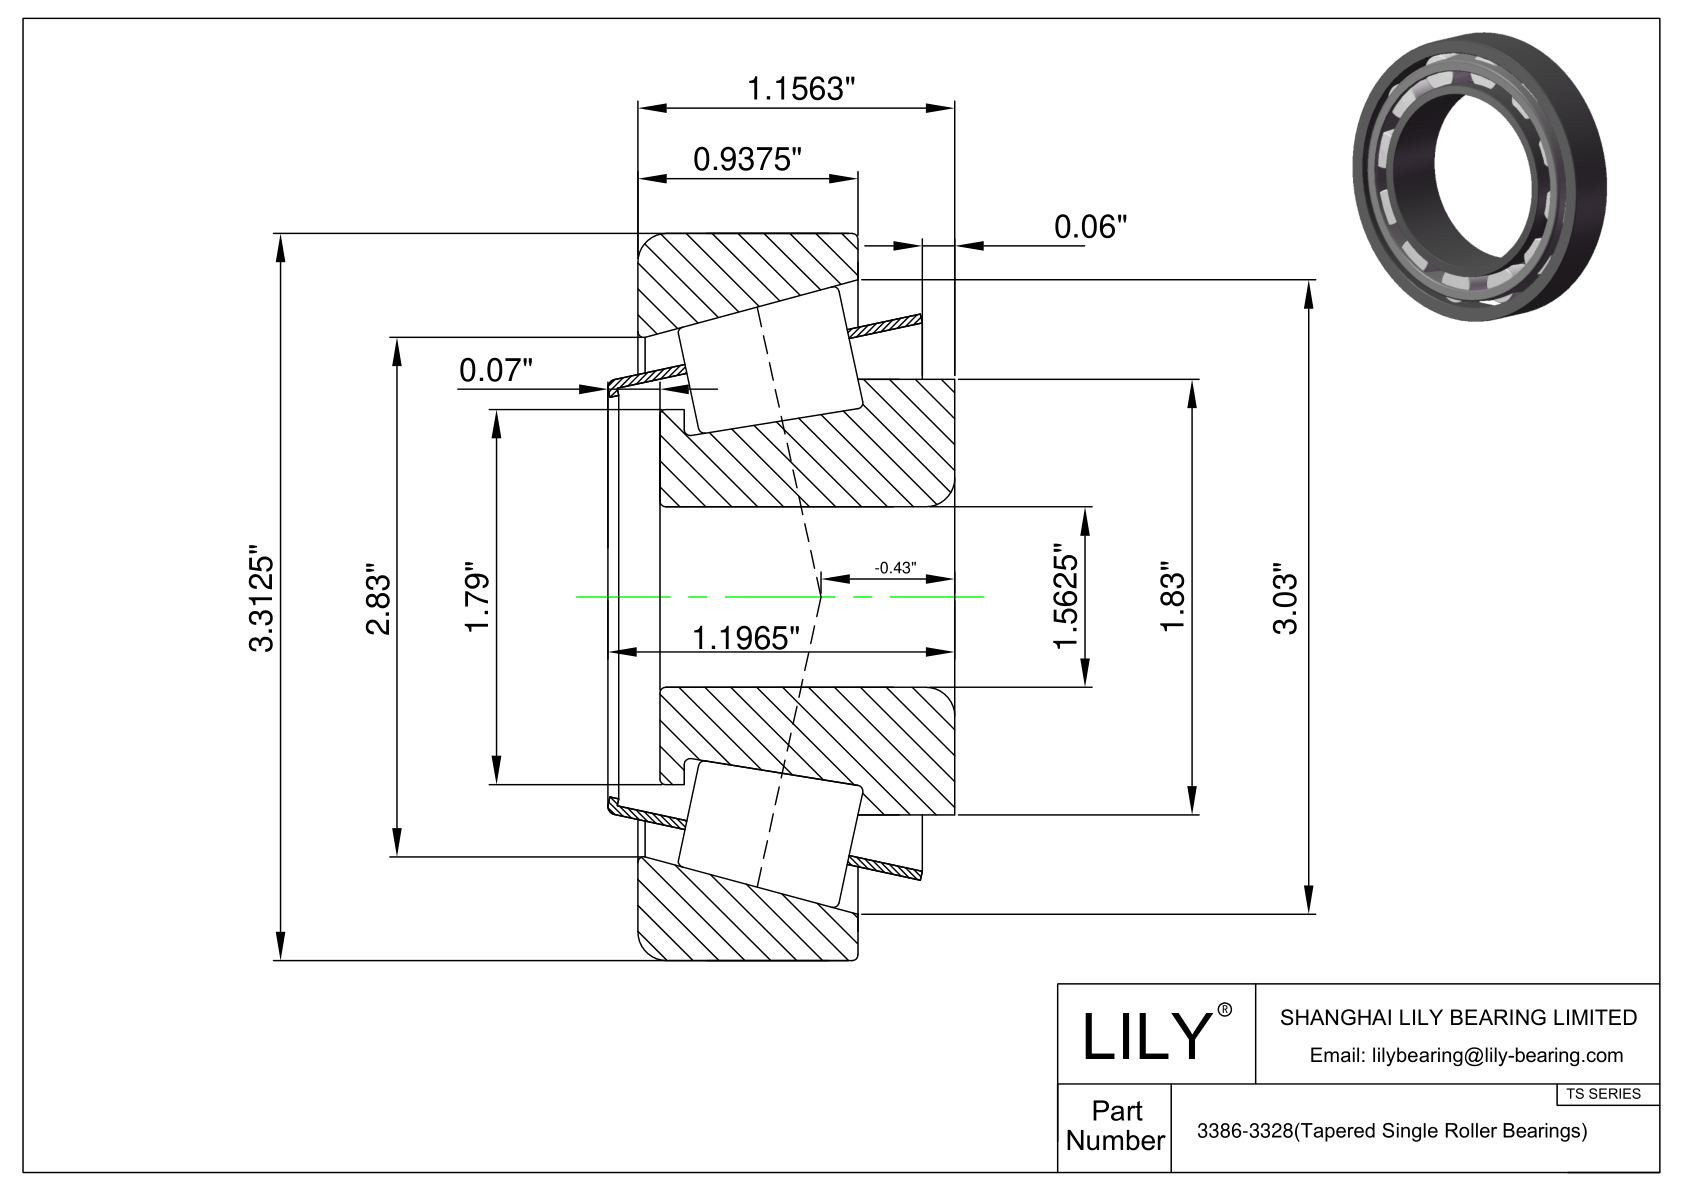 3386-3328 TS (Tapered Single Roller Bearings) (Imperial) cad drawing